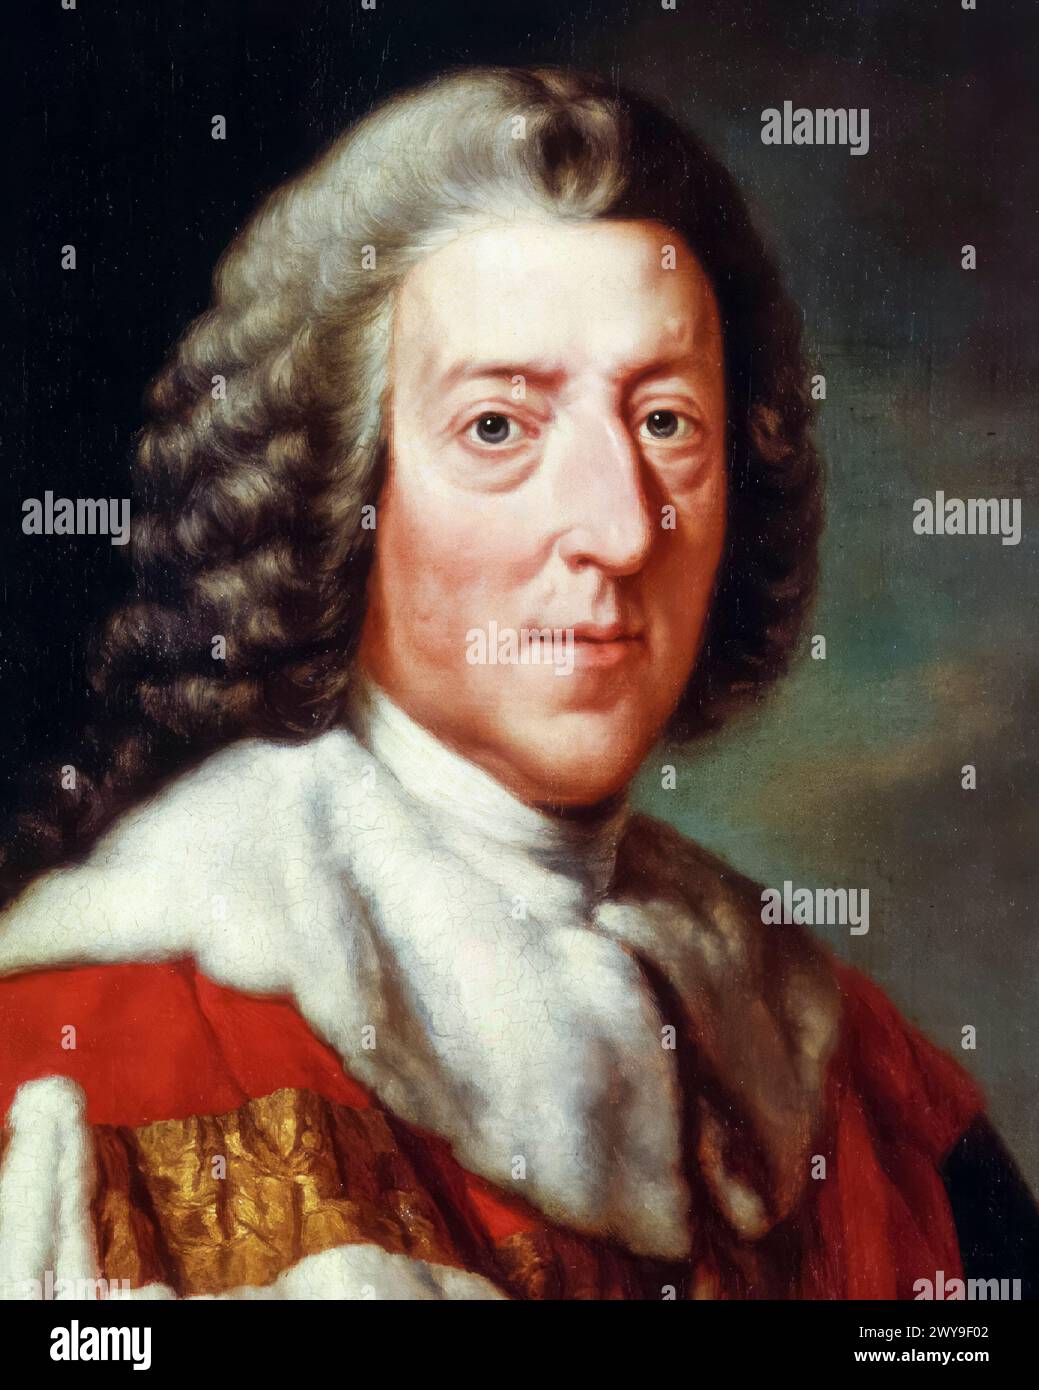 William Pitt the Elder, 1st Earl of Chatham (1708-1778), Whig politician and Prime Minister of Great Britain 1766-1768, portrait painting in oil on canvas after Richard Brompton, 1772 Stock Photo